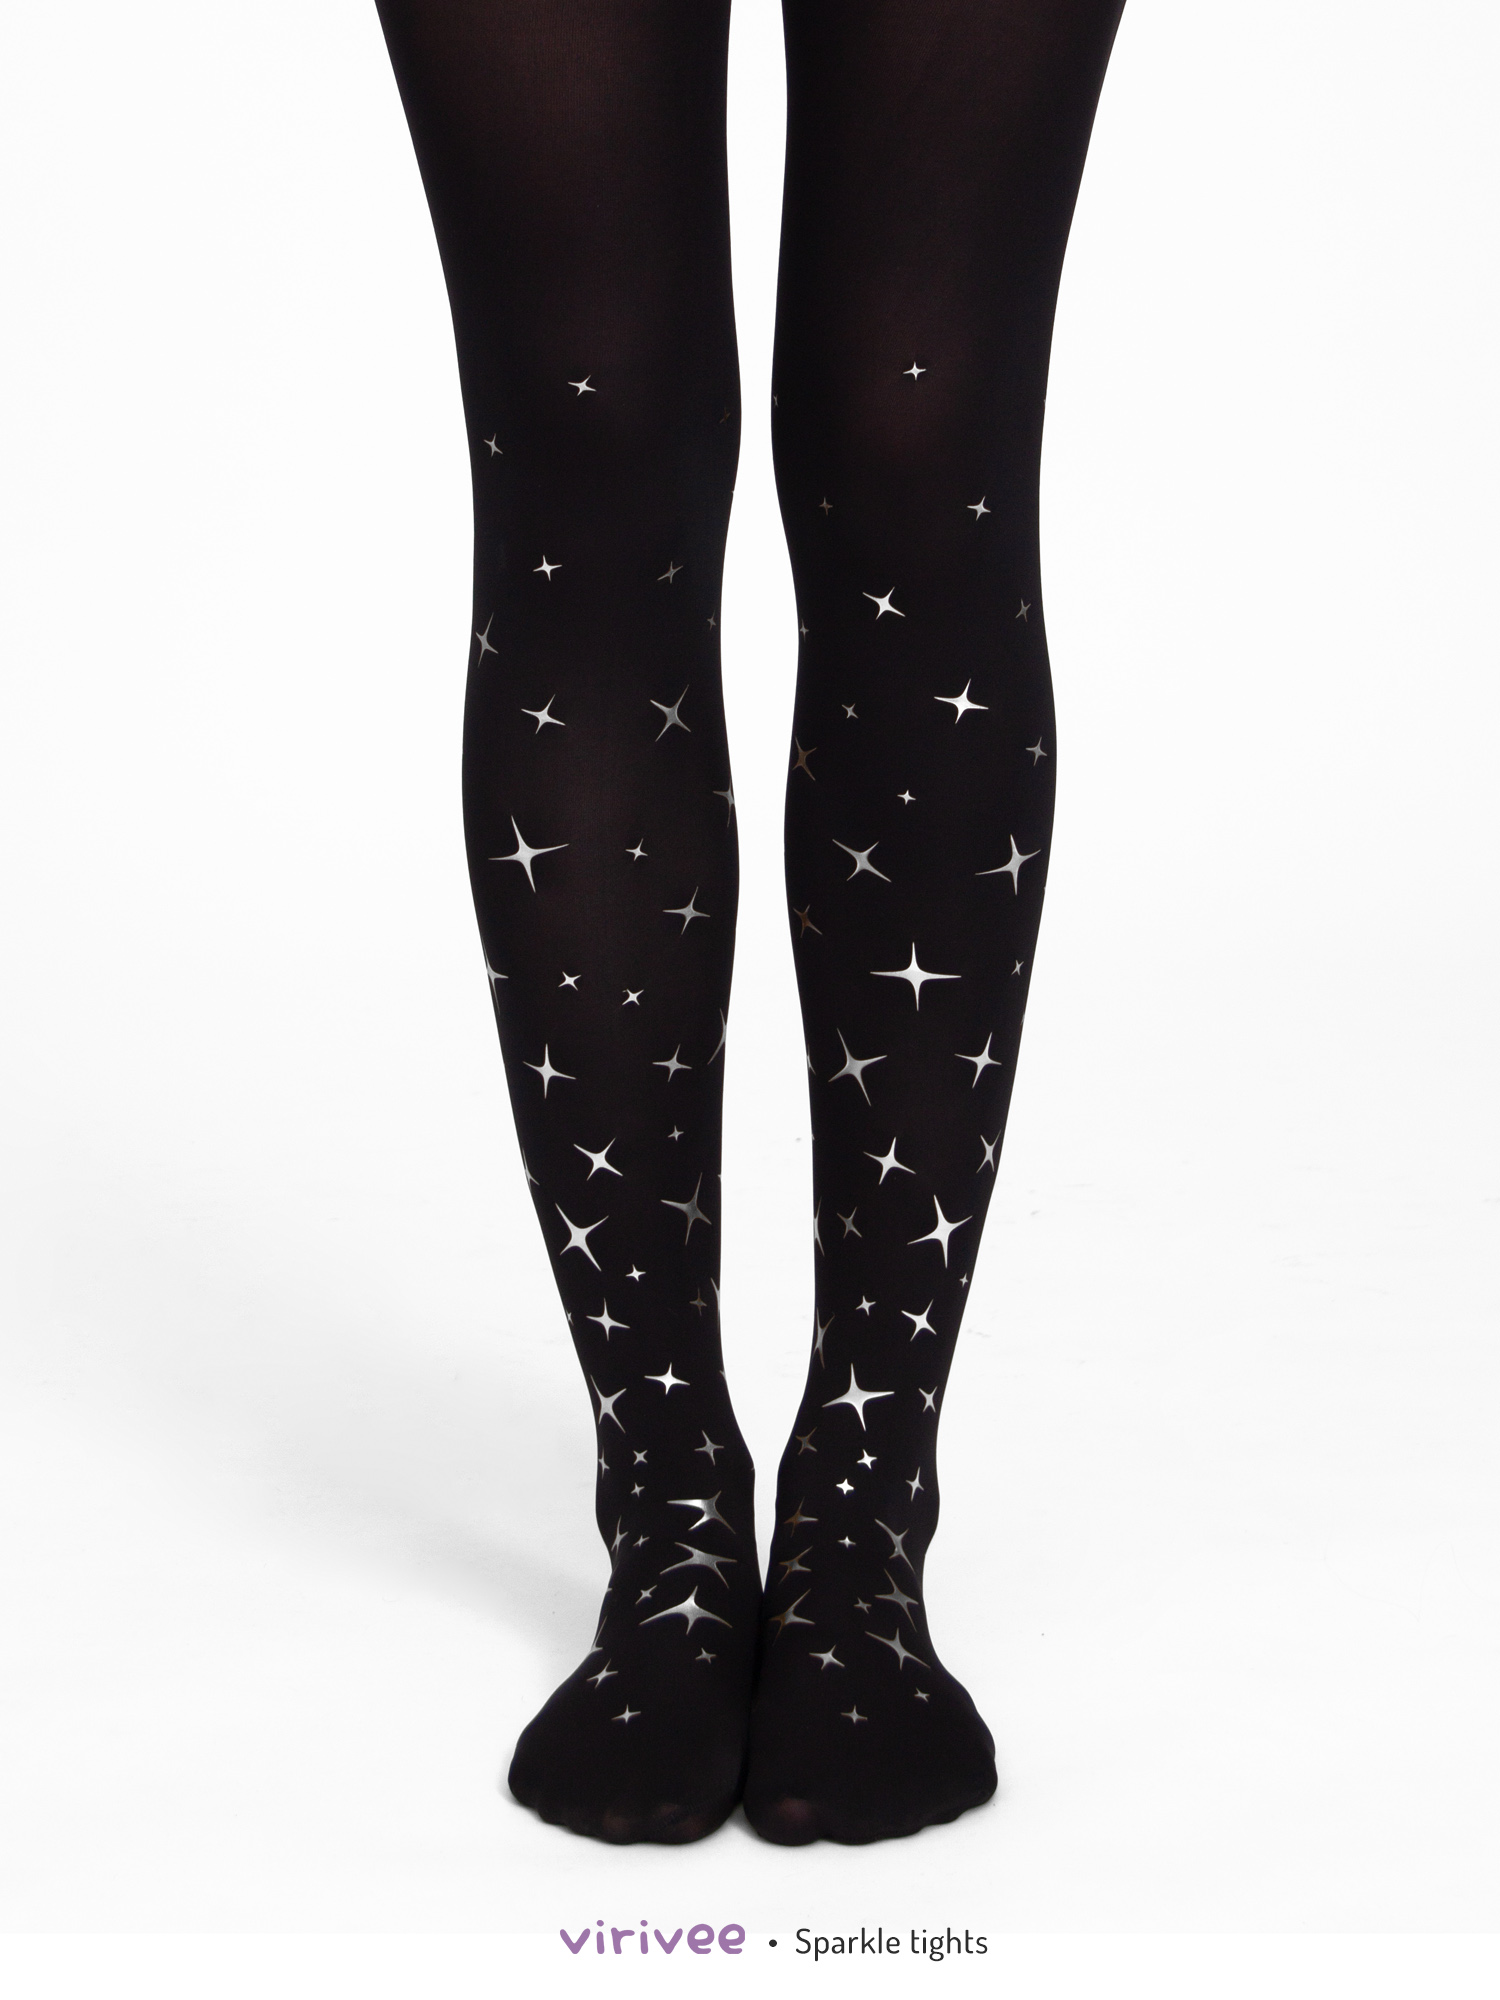 Sparkle tights with gold or silver print - Virivee Tights - Unique